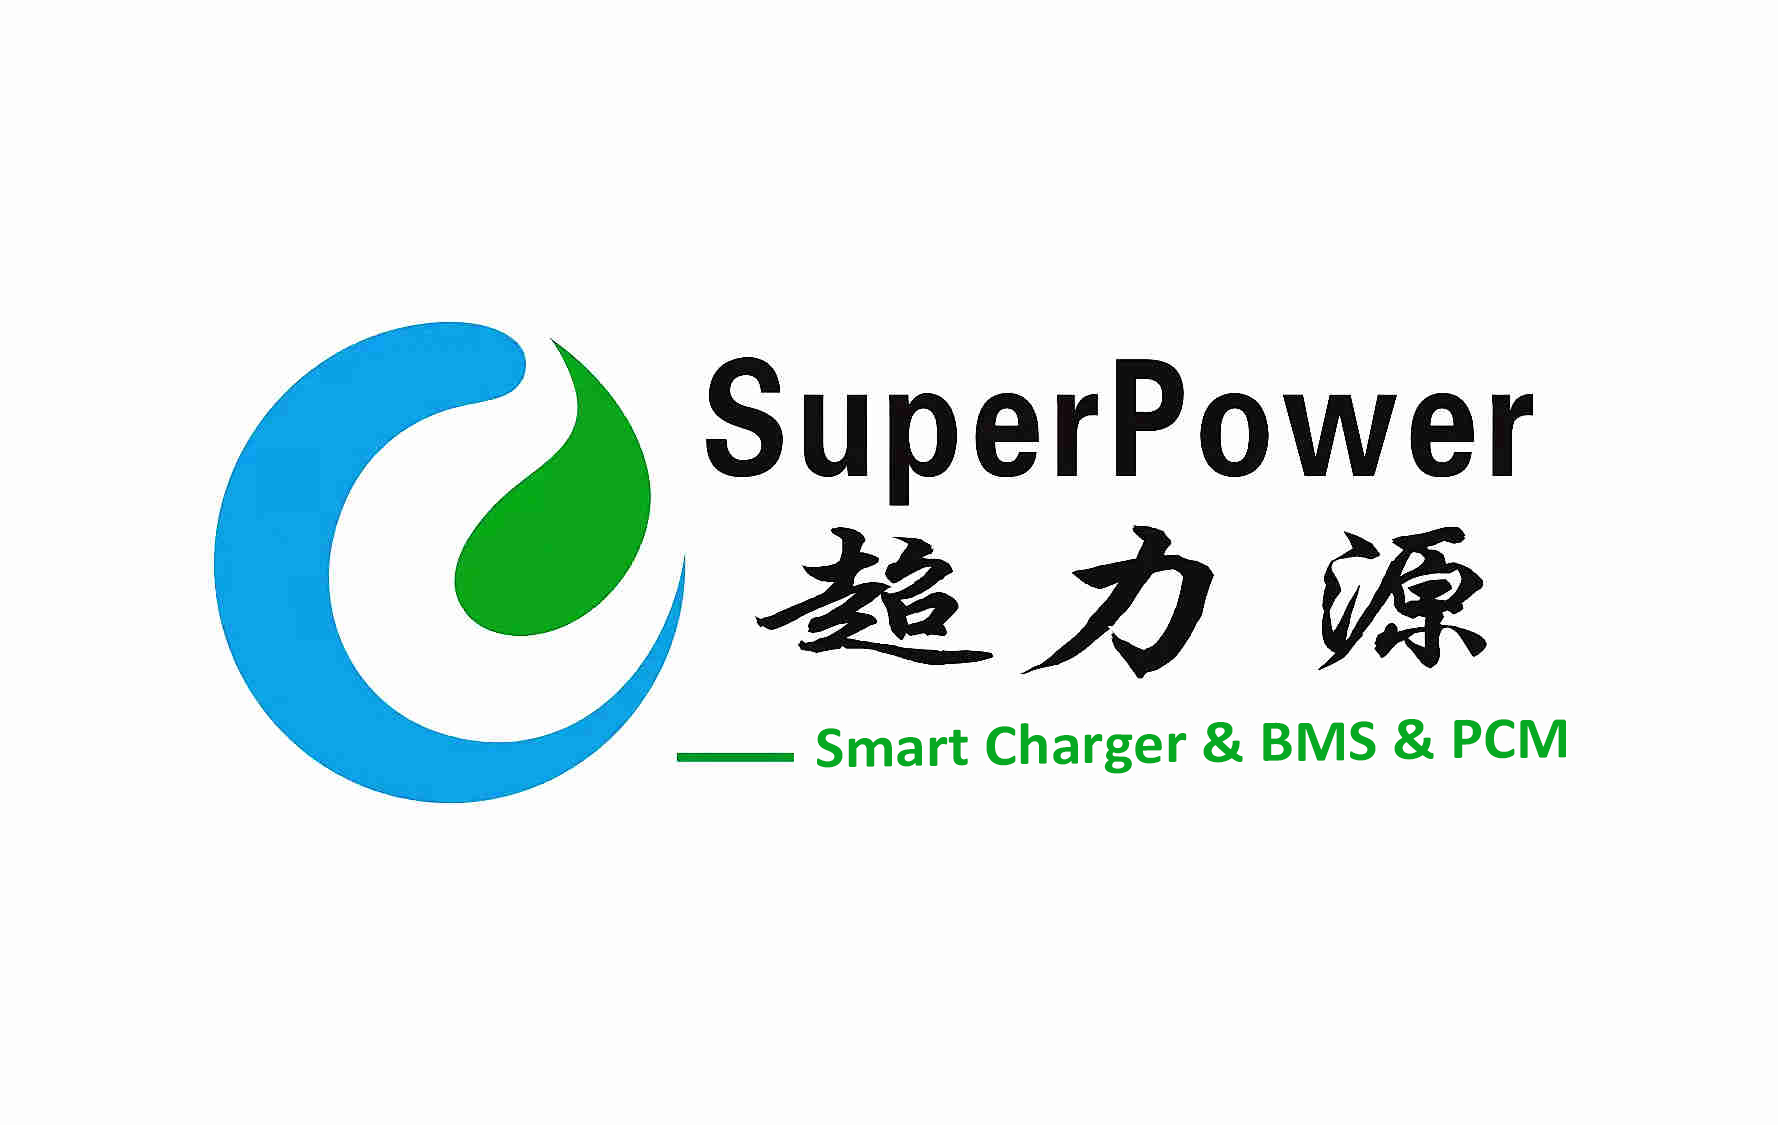 Video of Superpower company 